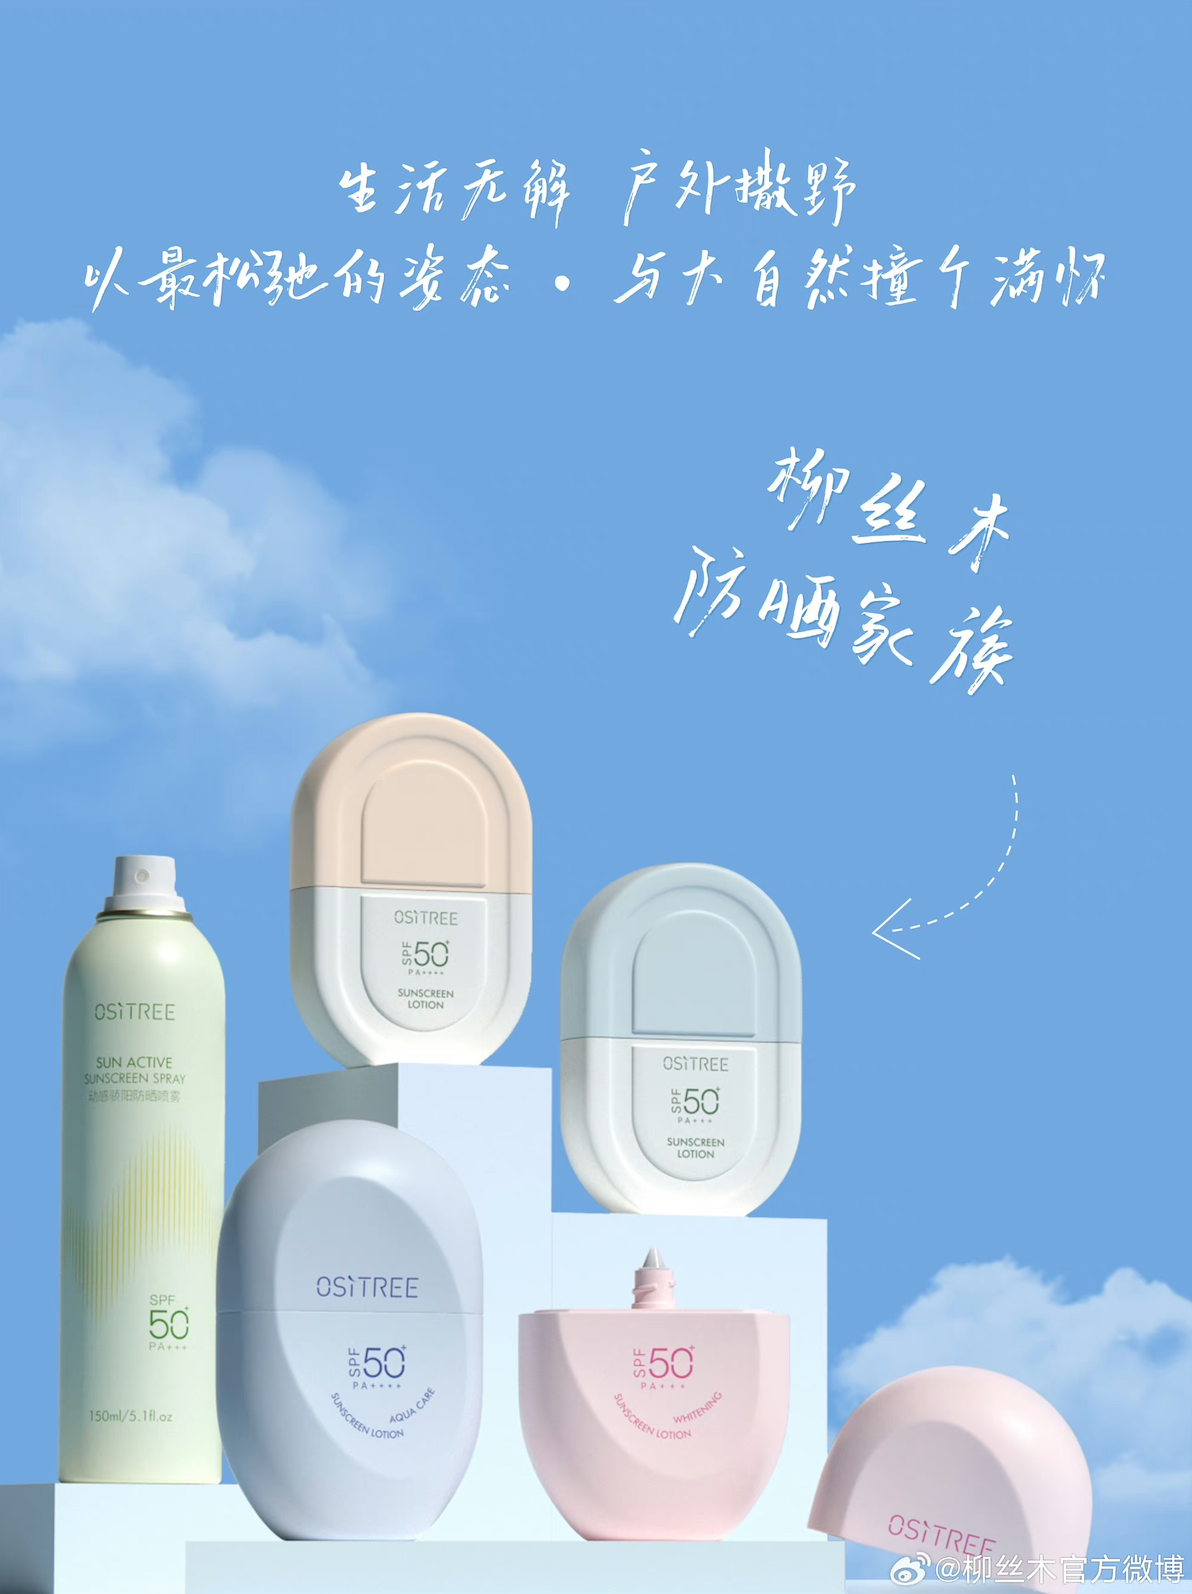 Ositree exemplifies the industry’s commitment to personalized skincare solutions. Image: Ositree's Weibo